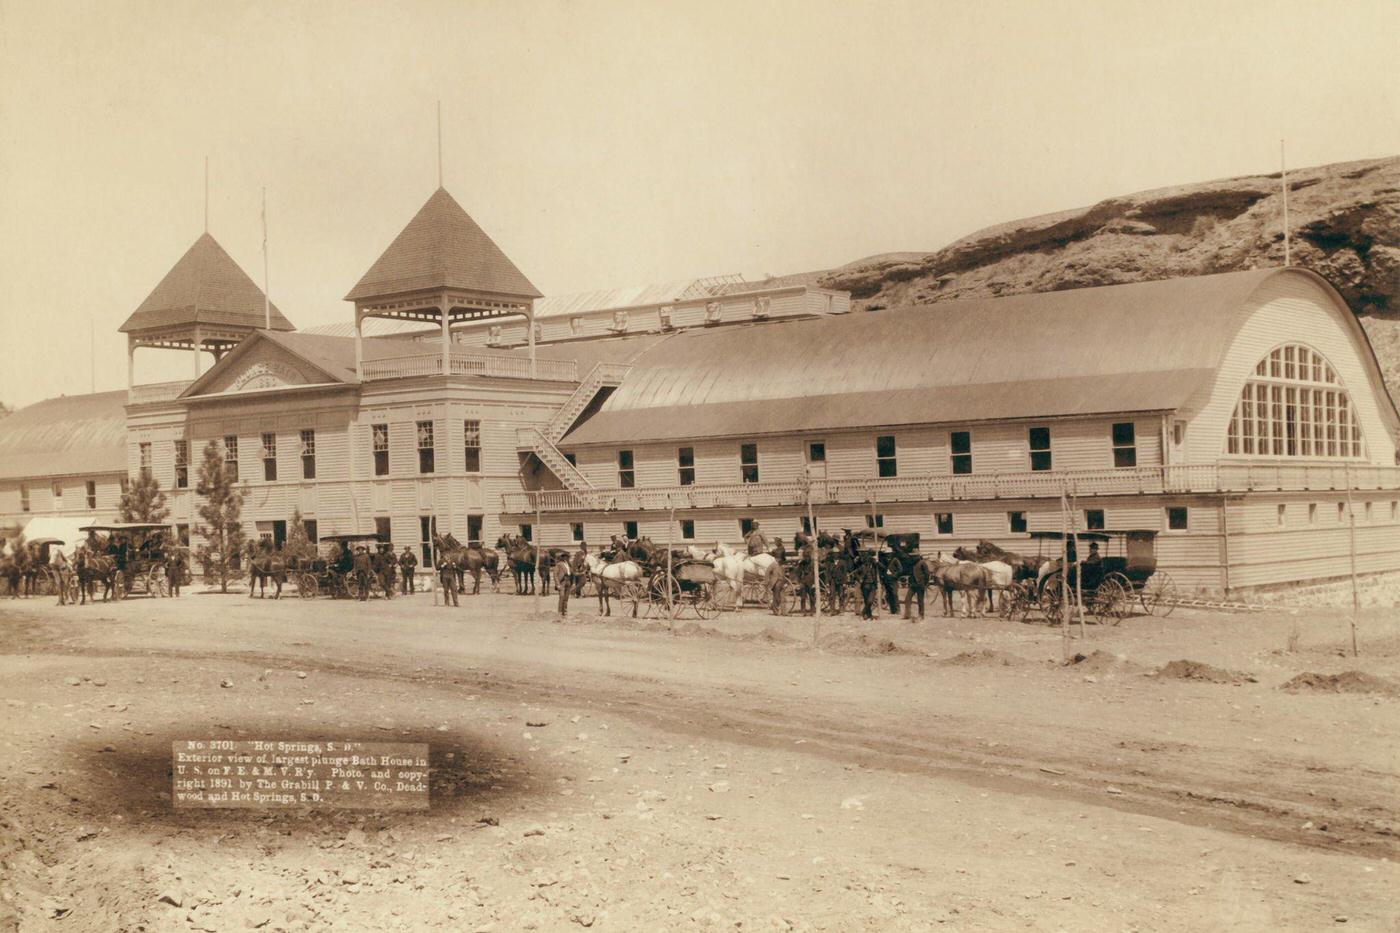 Hot Springs Bath House, United States, circa 1890: Exterior view of largest plunge bath house in U.S. on F.E. and M.V. Railway; Large building with several horses and carriages in front.